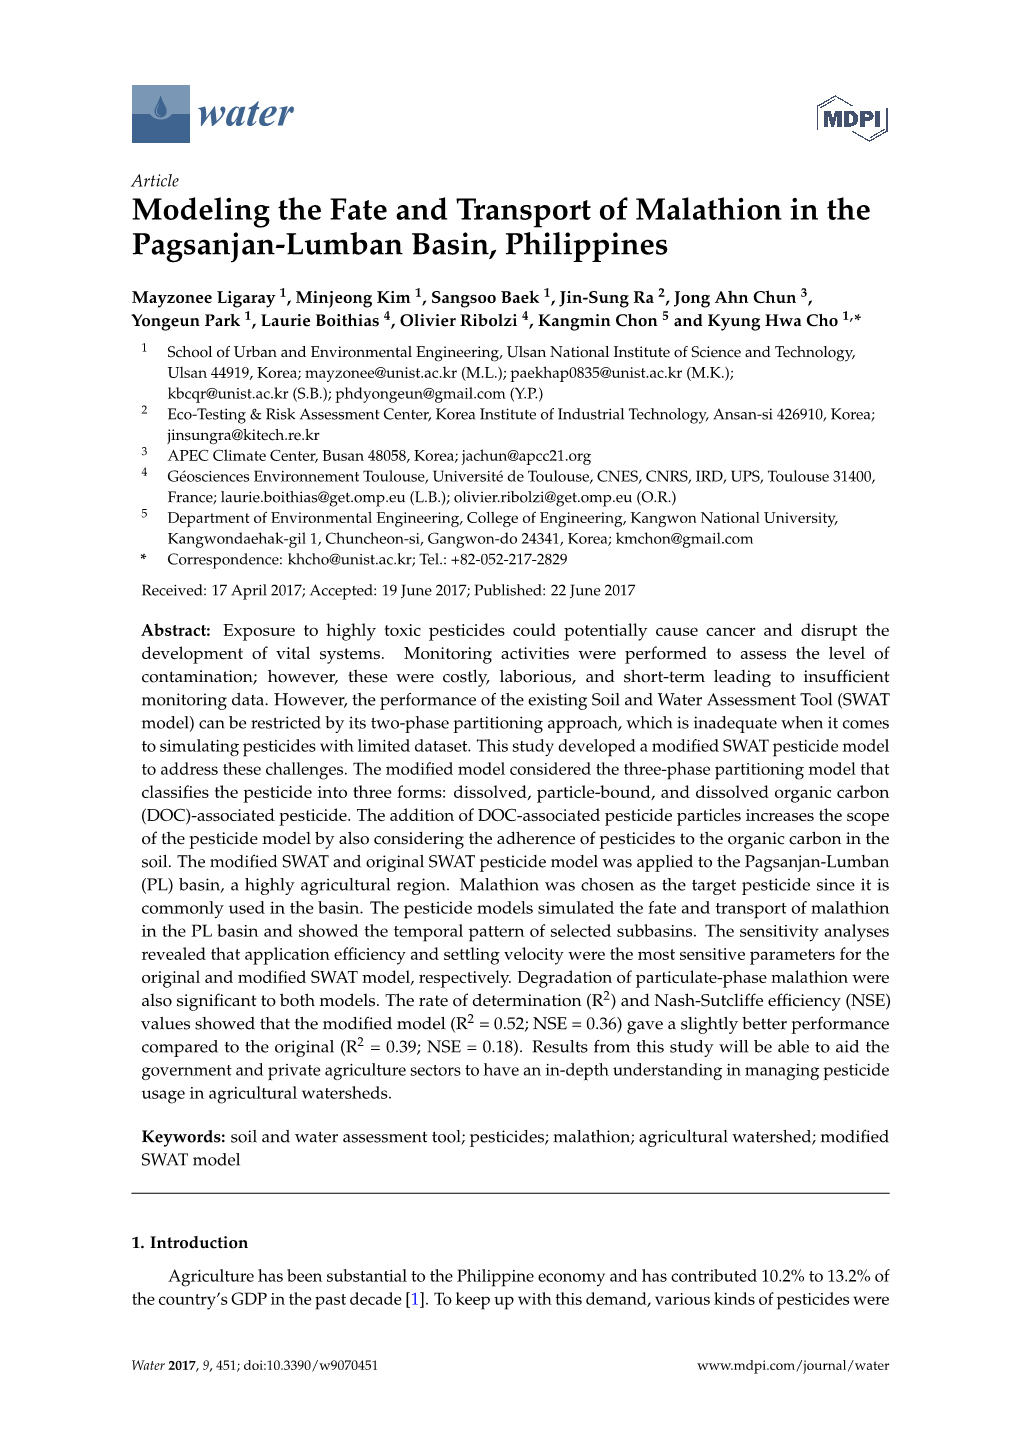 Modeling the Fate and Transport of Malathion in the Pagsanjan-Lumban Basin, Philippines